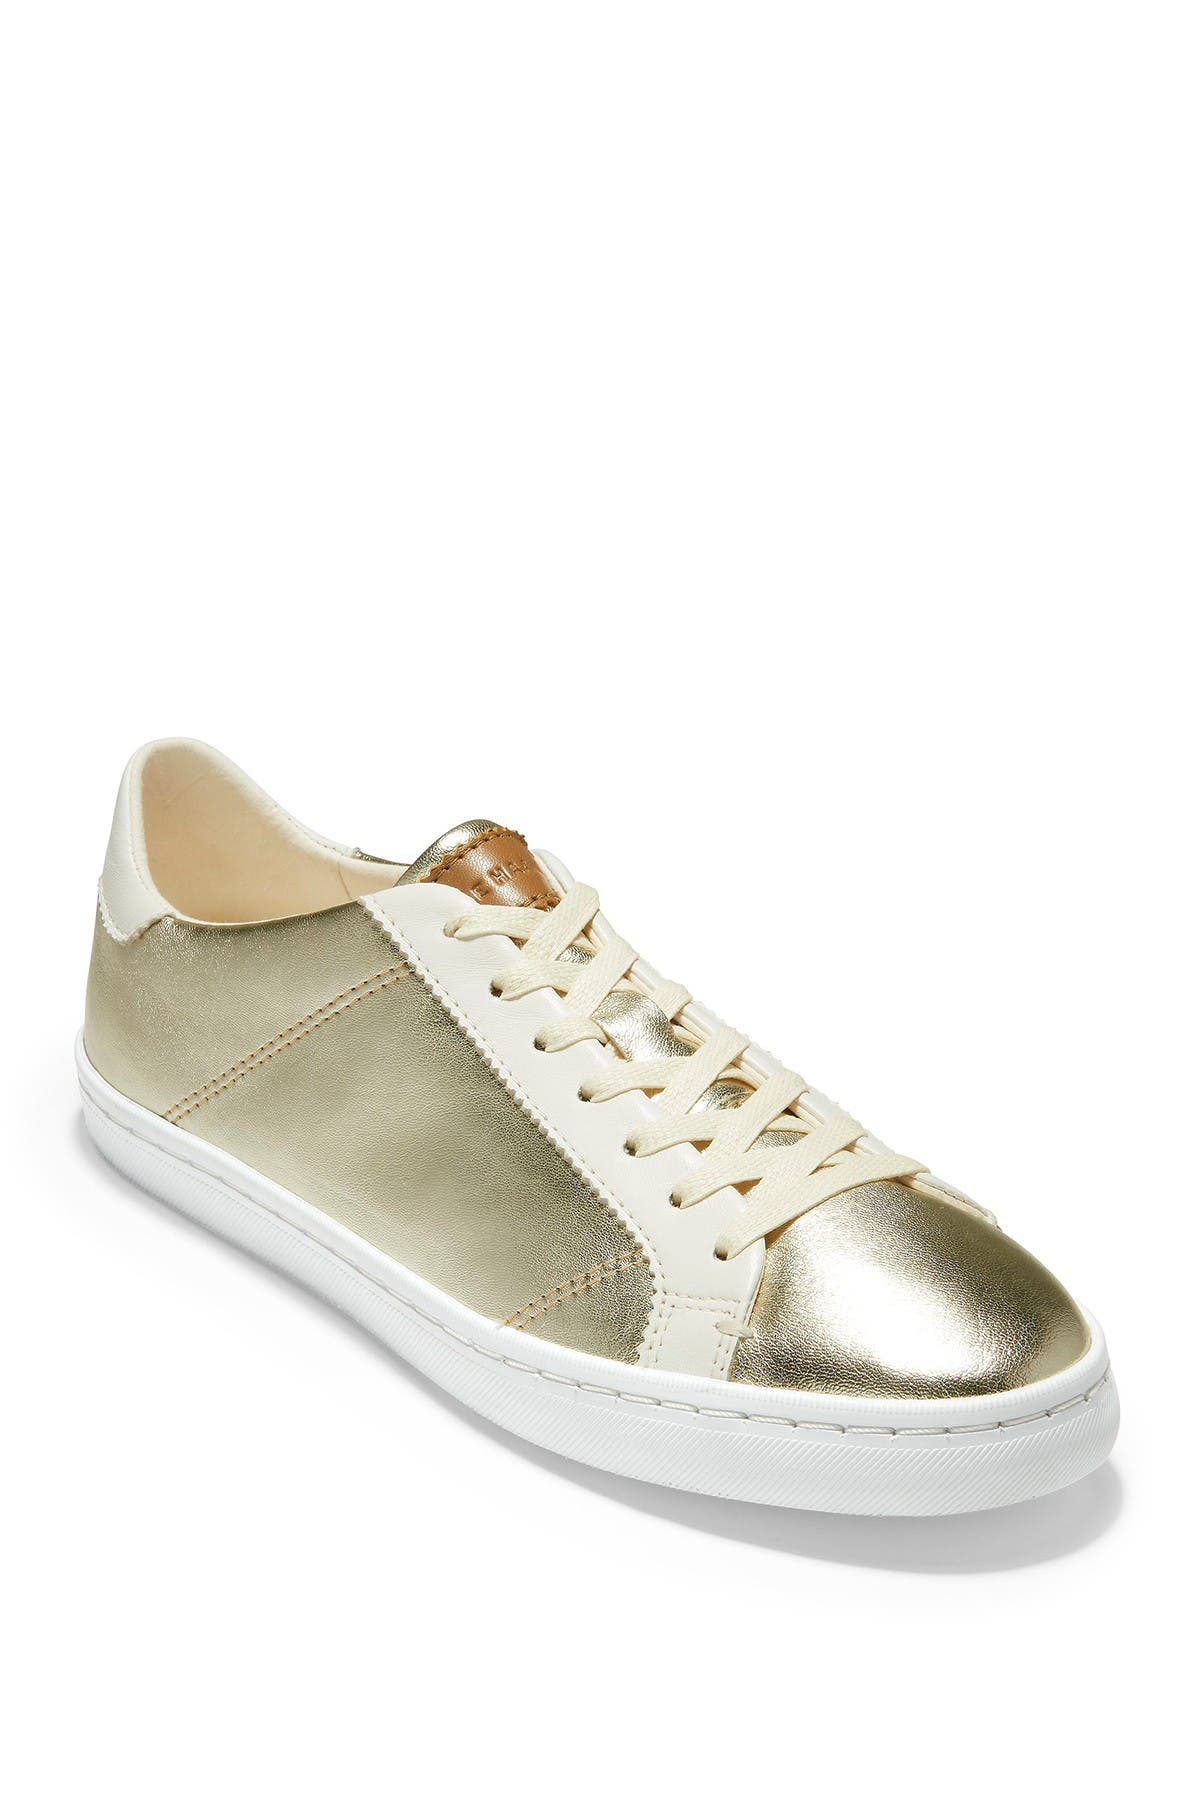 cole haan margo lace up sneakers